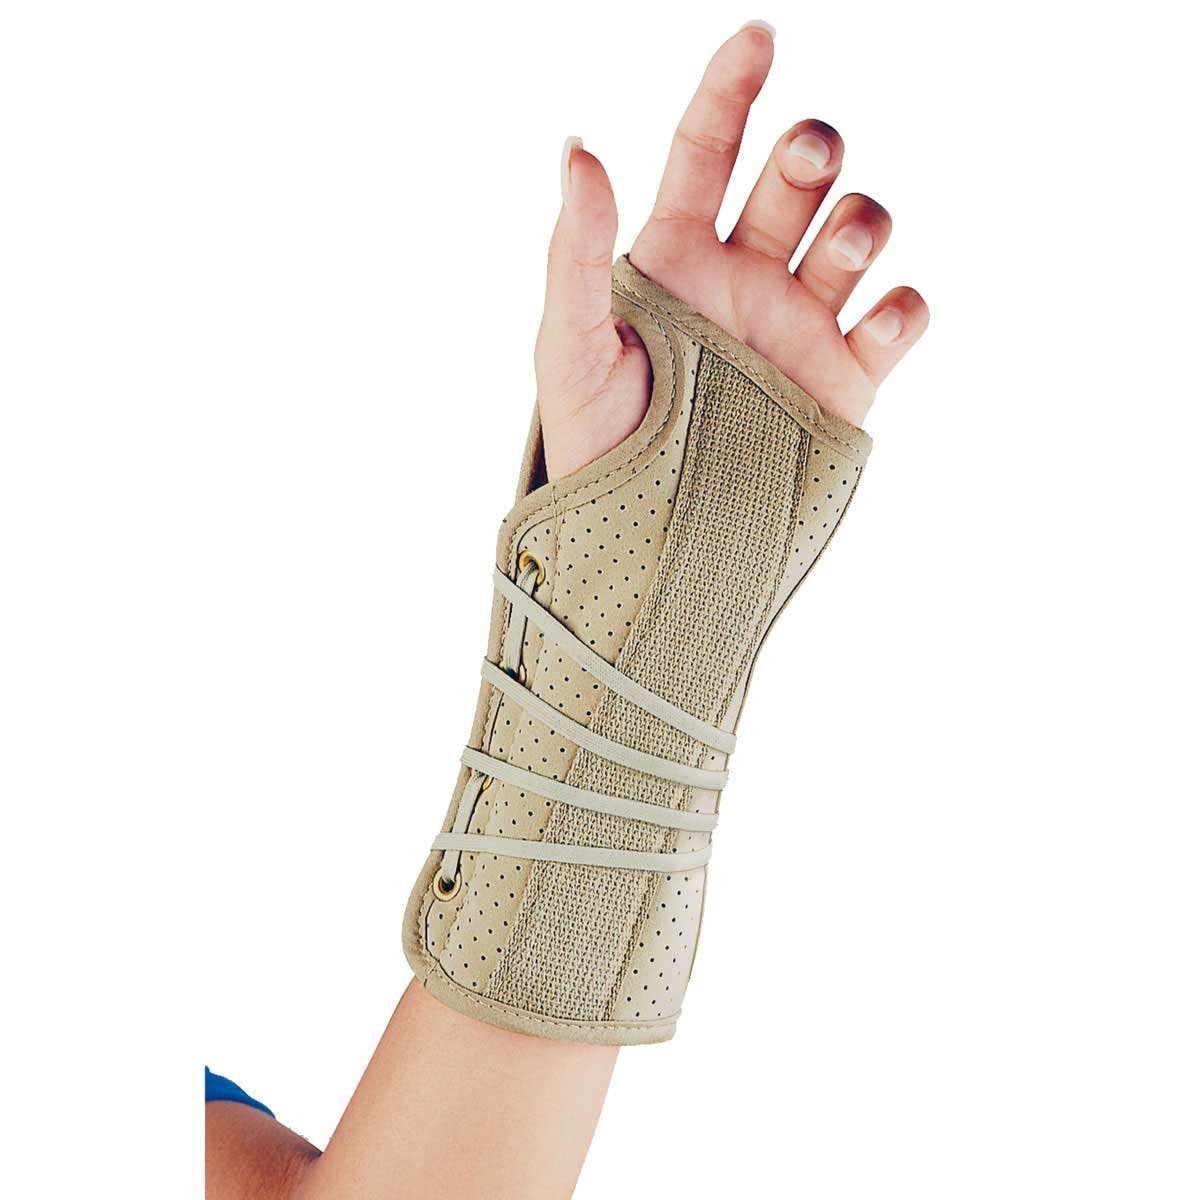 22-151LGBEG Suede Finish Wrist Brace Left - Midwest DME Supply